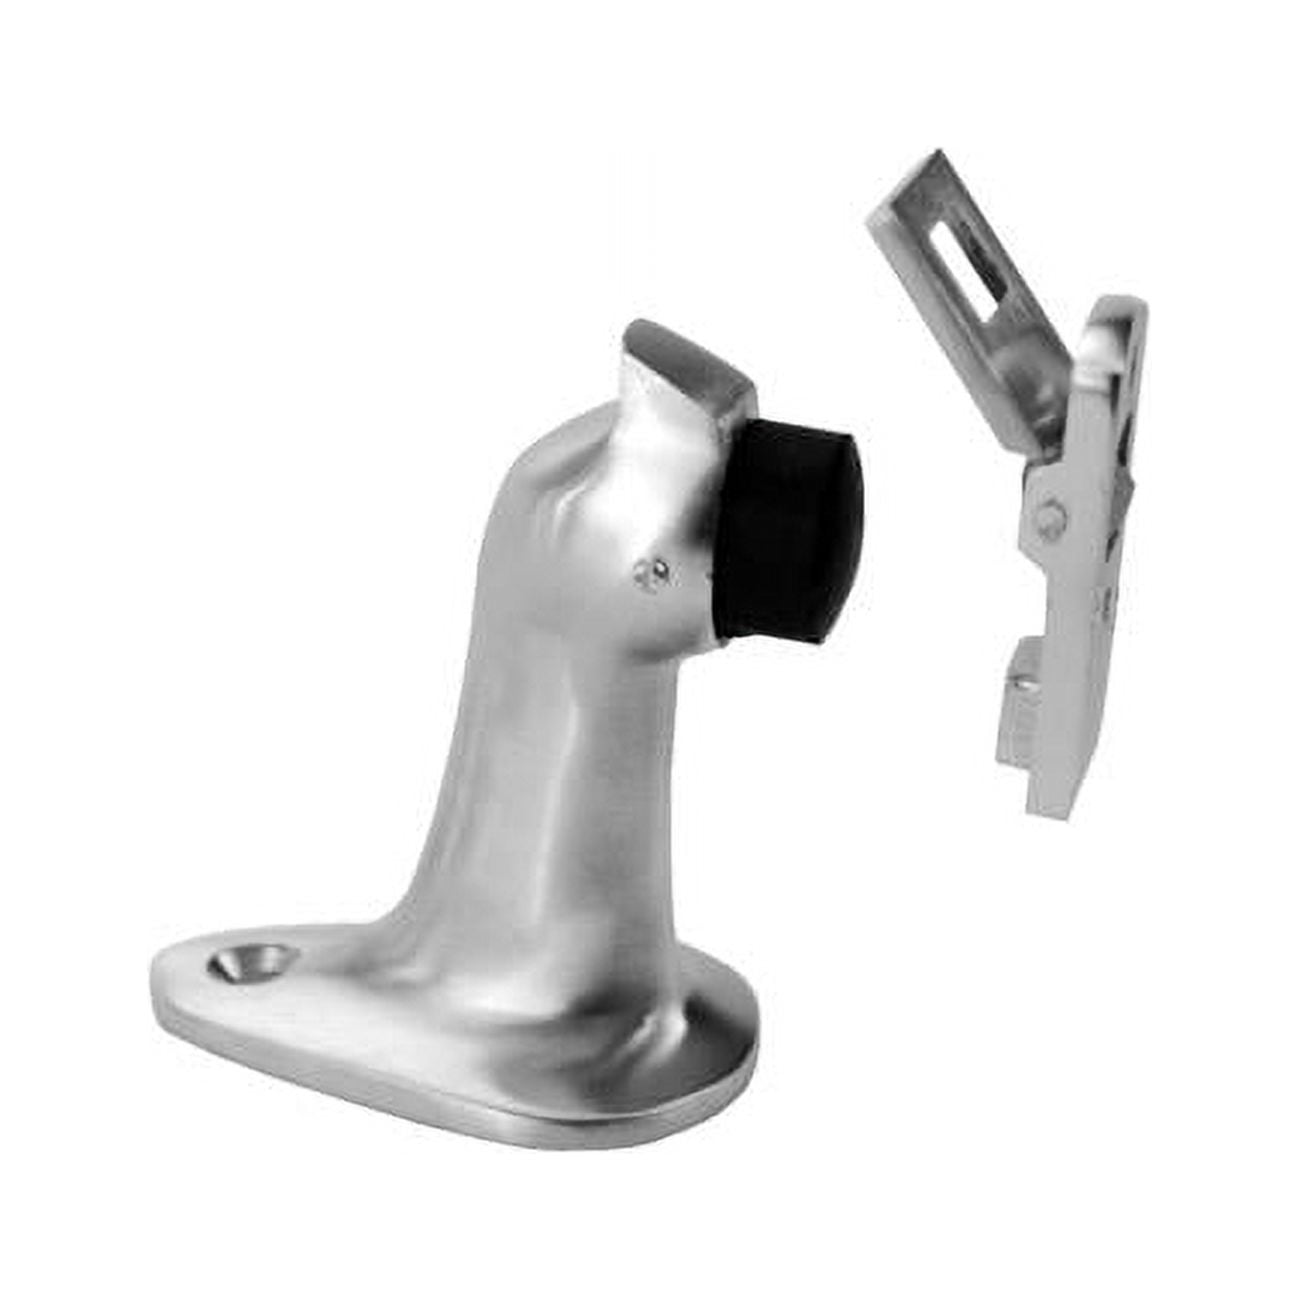 1453-626 Bright Chrome Door Stop With Holder